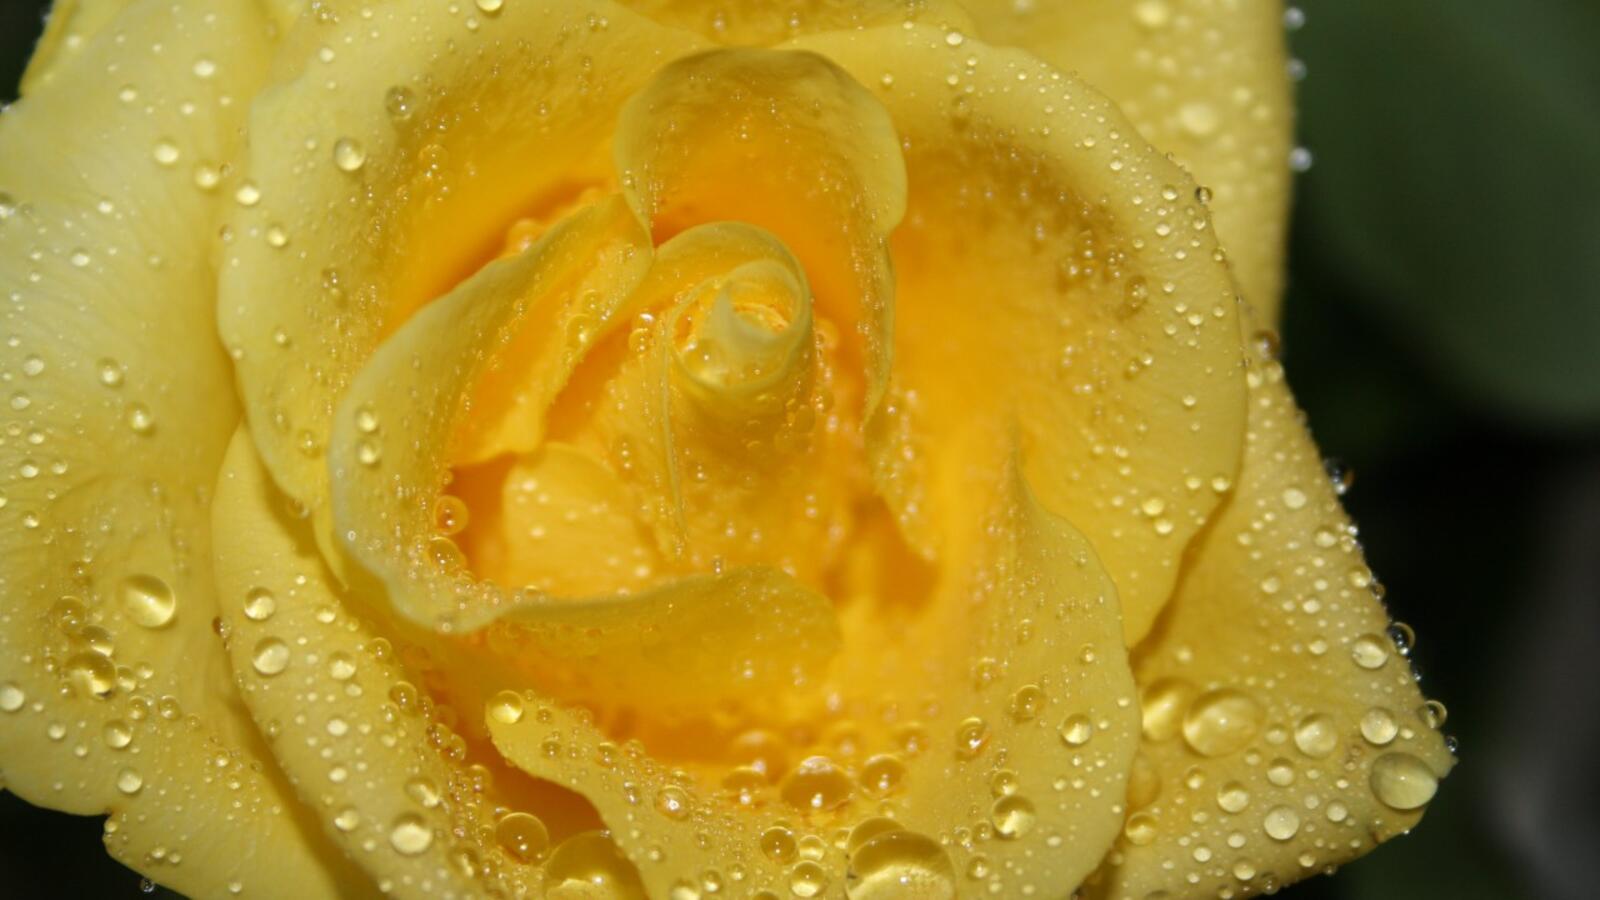 Wallpapers rose yellow love on the desktop